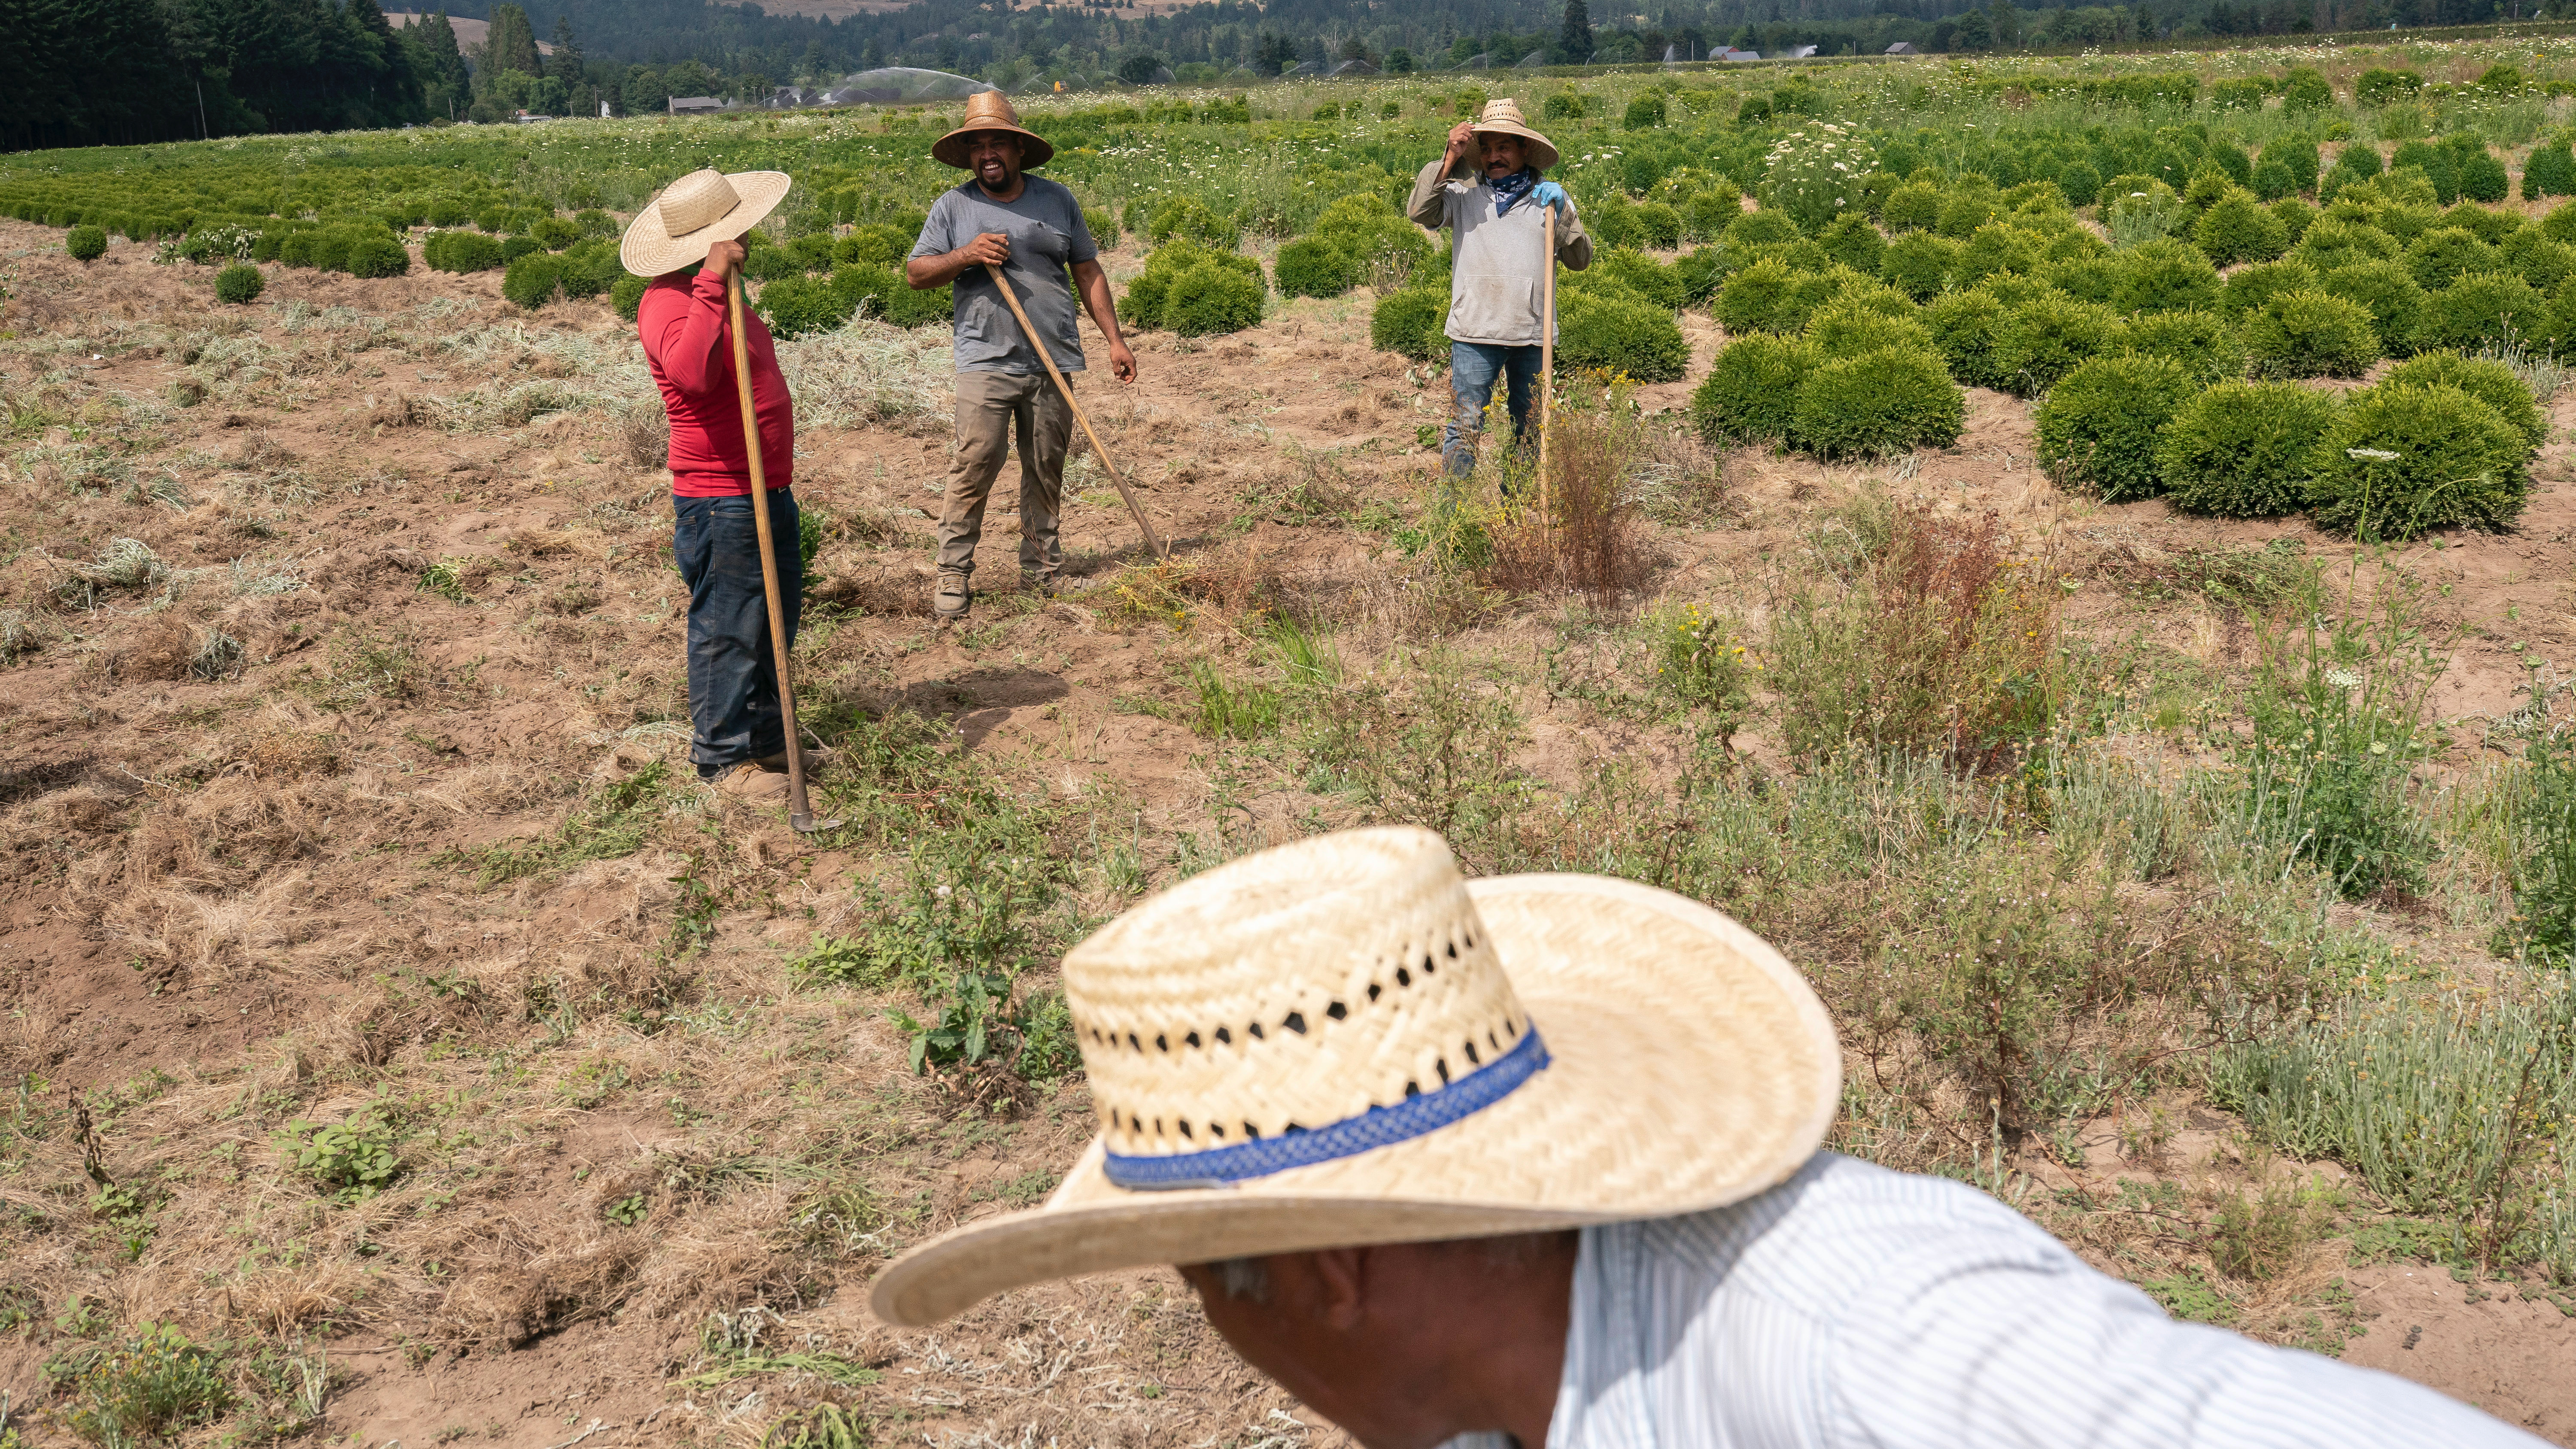 Farmworkers, who declined to give their names, break up earth, July 1, 2021, near St. Paul, Oregon.